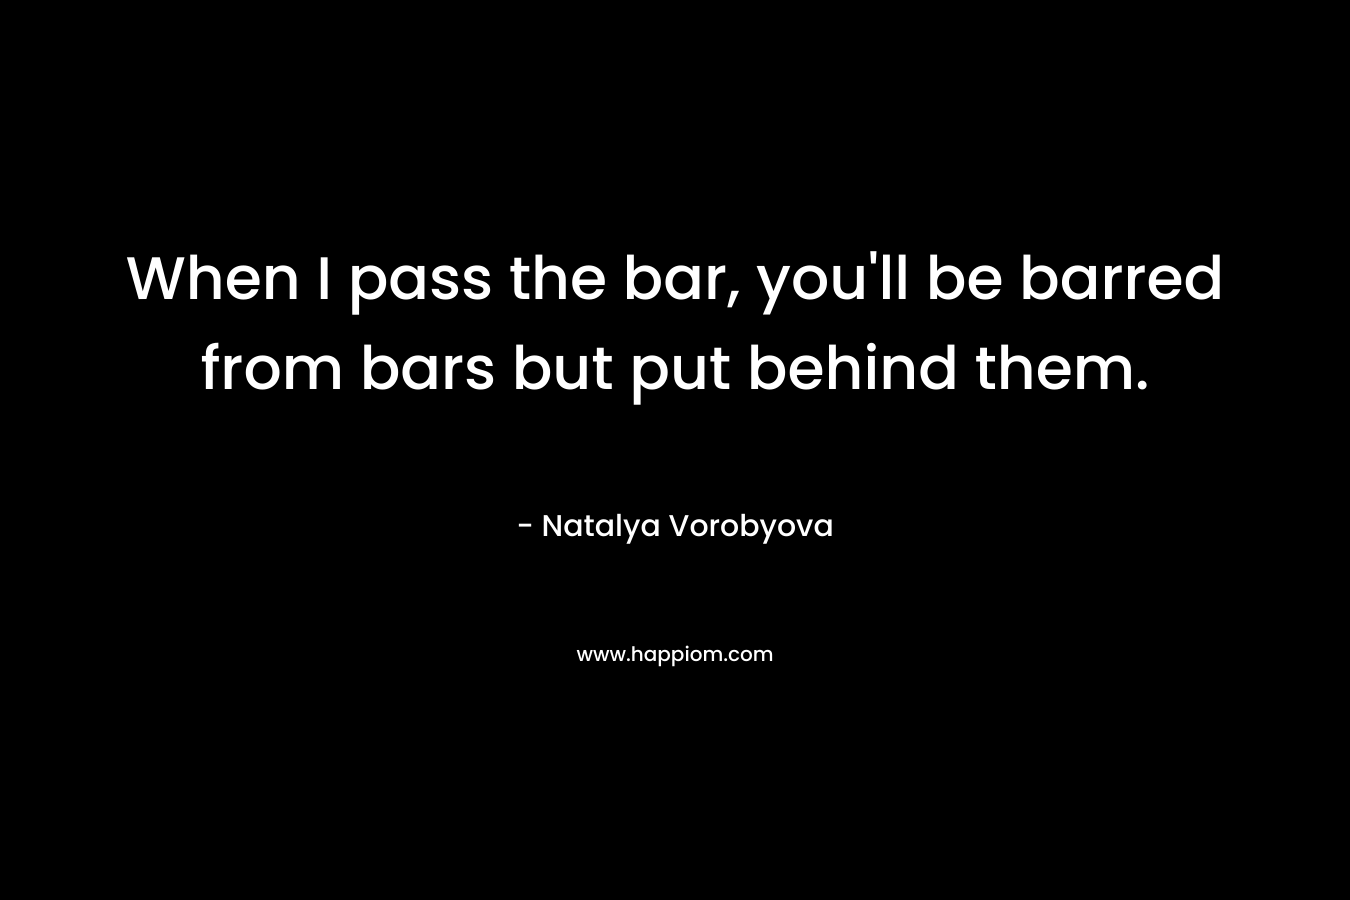 When I pass the bar, you’ll be barred from bars but put behind them. – Natalya Vorobyova